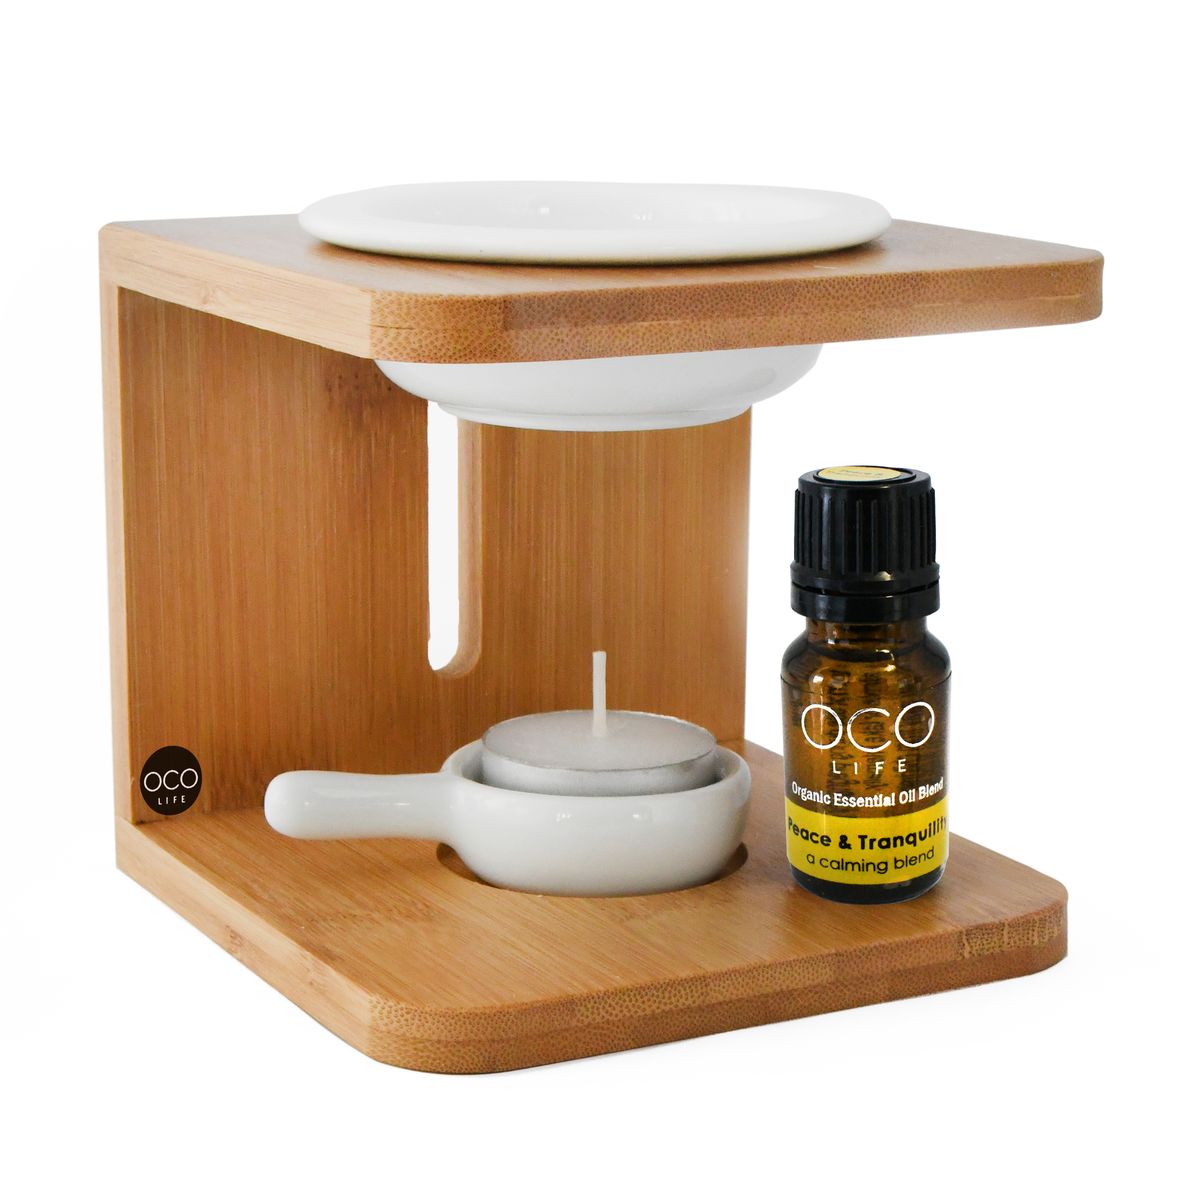 Bamboo Oil and Wax Melt Aroma Burner with Oil blend